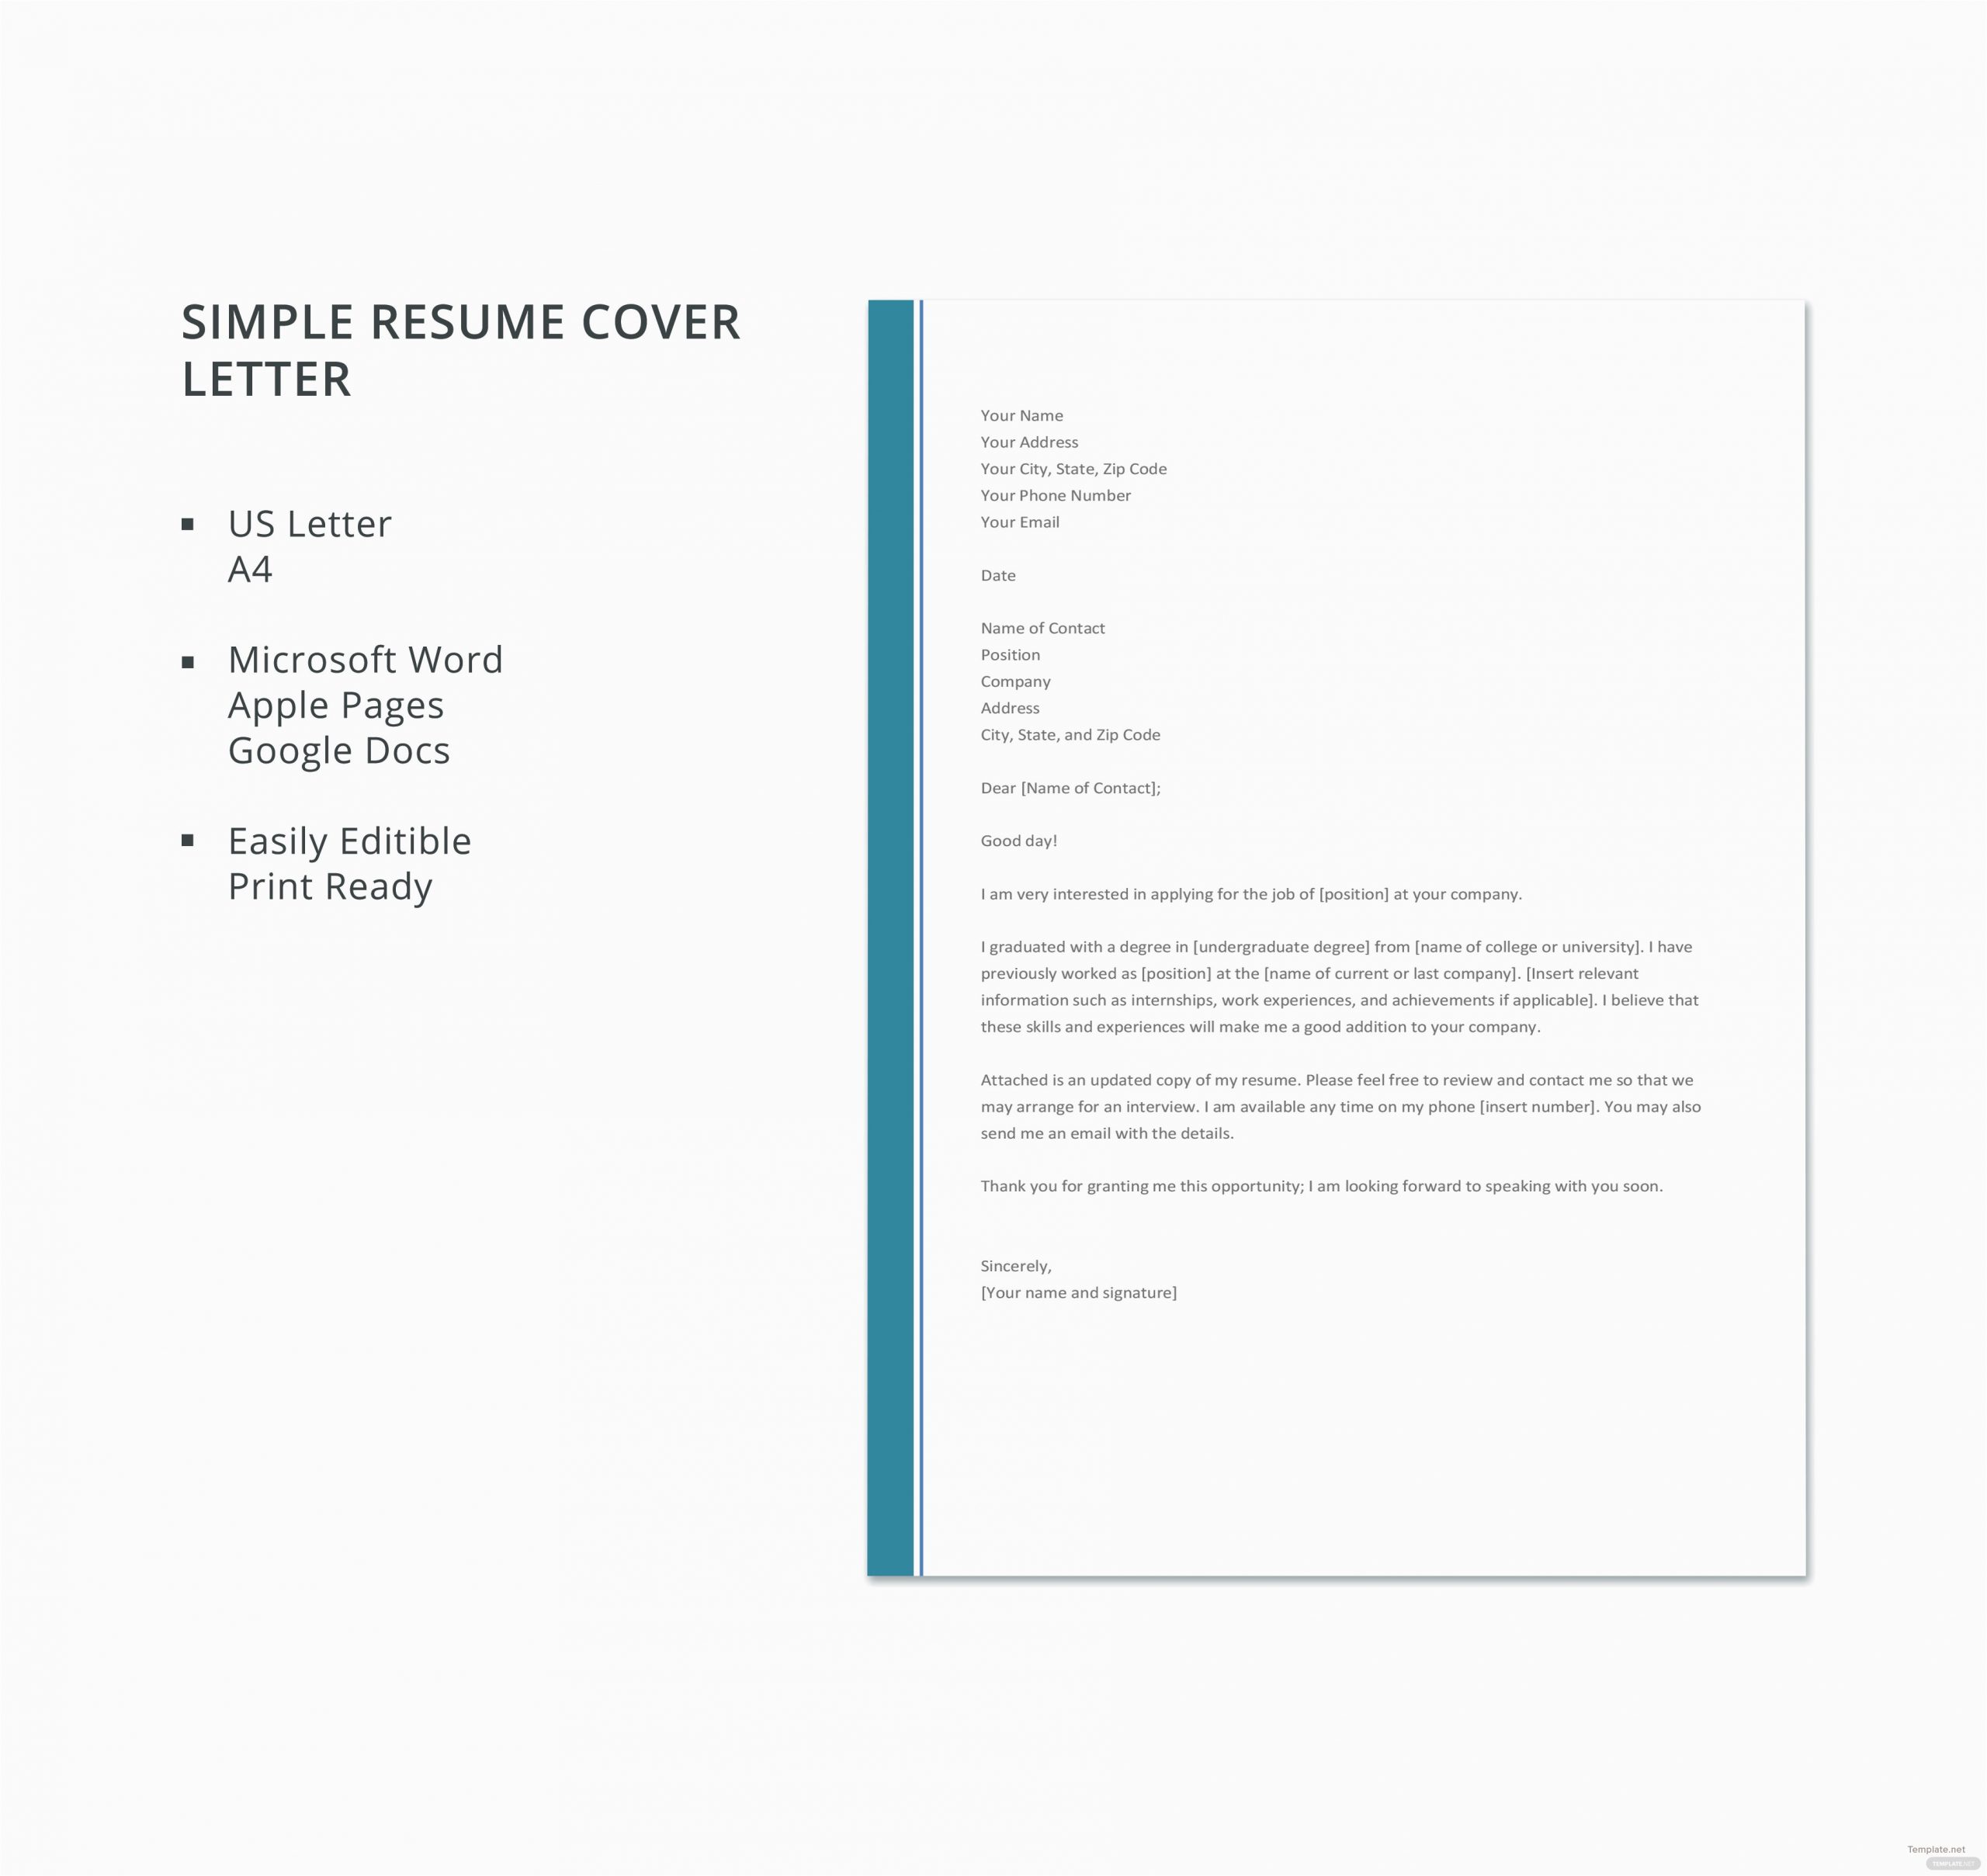 Simple Resume and Cover Letter Template Free Simple Resume Cover Letter Template In Microsoft Word